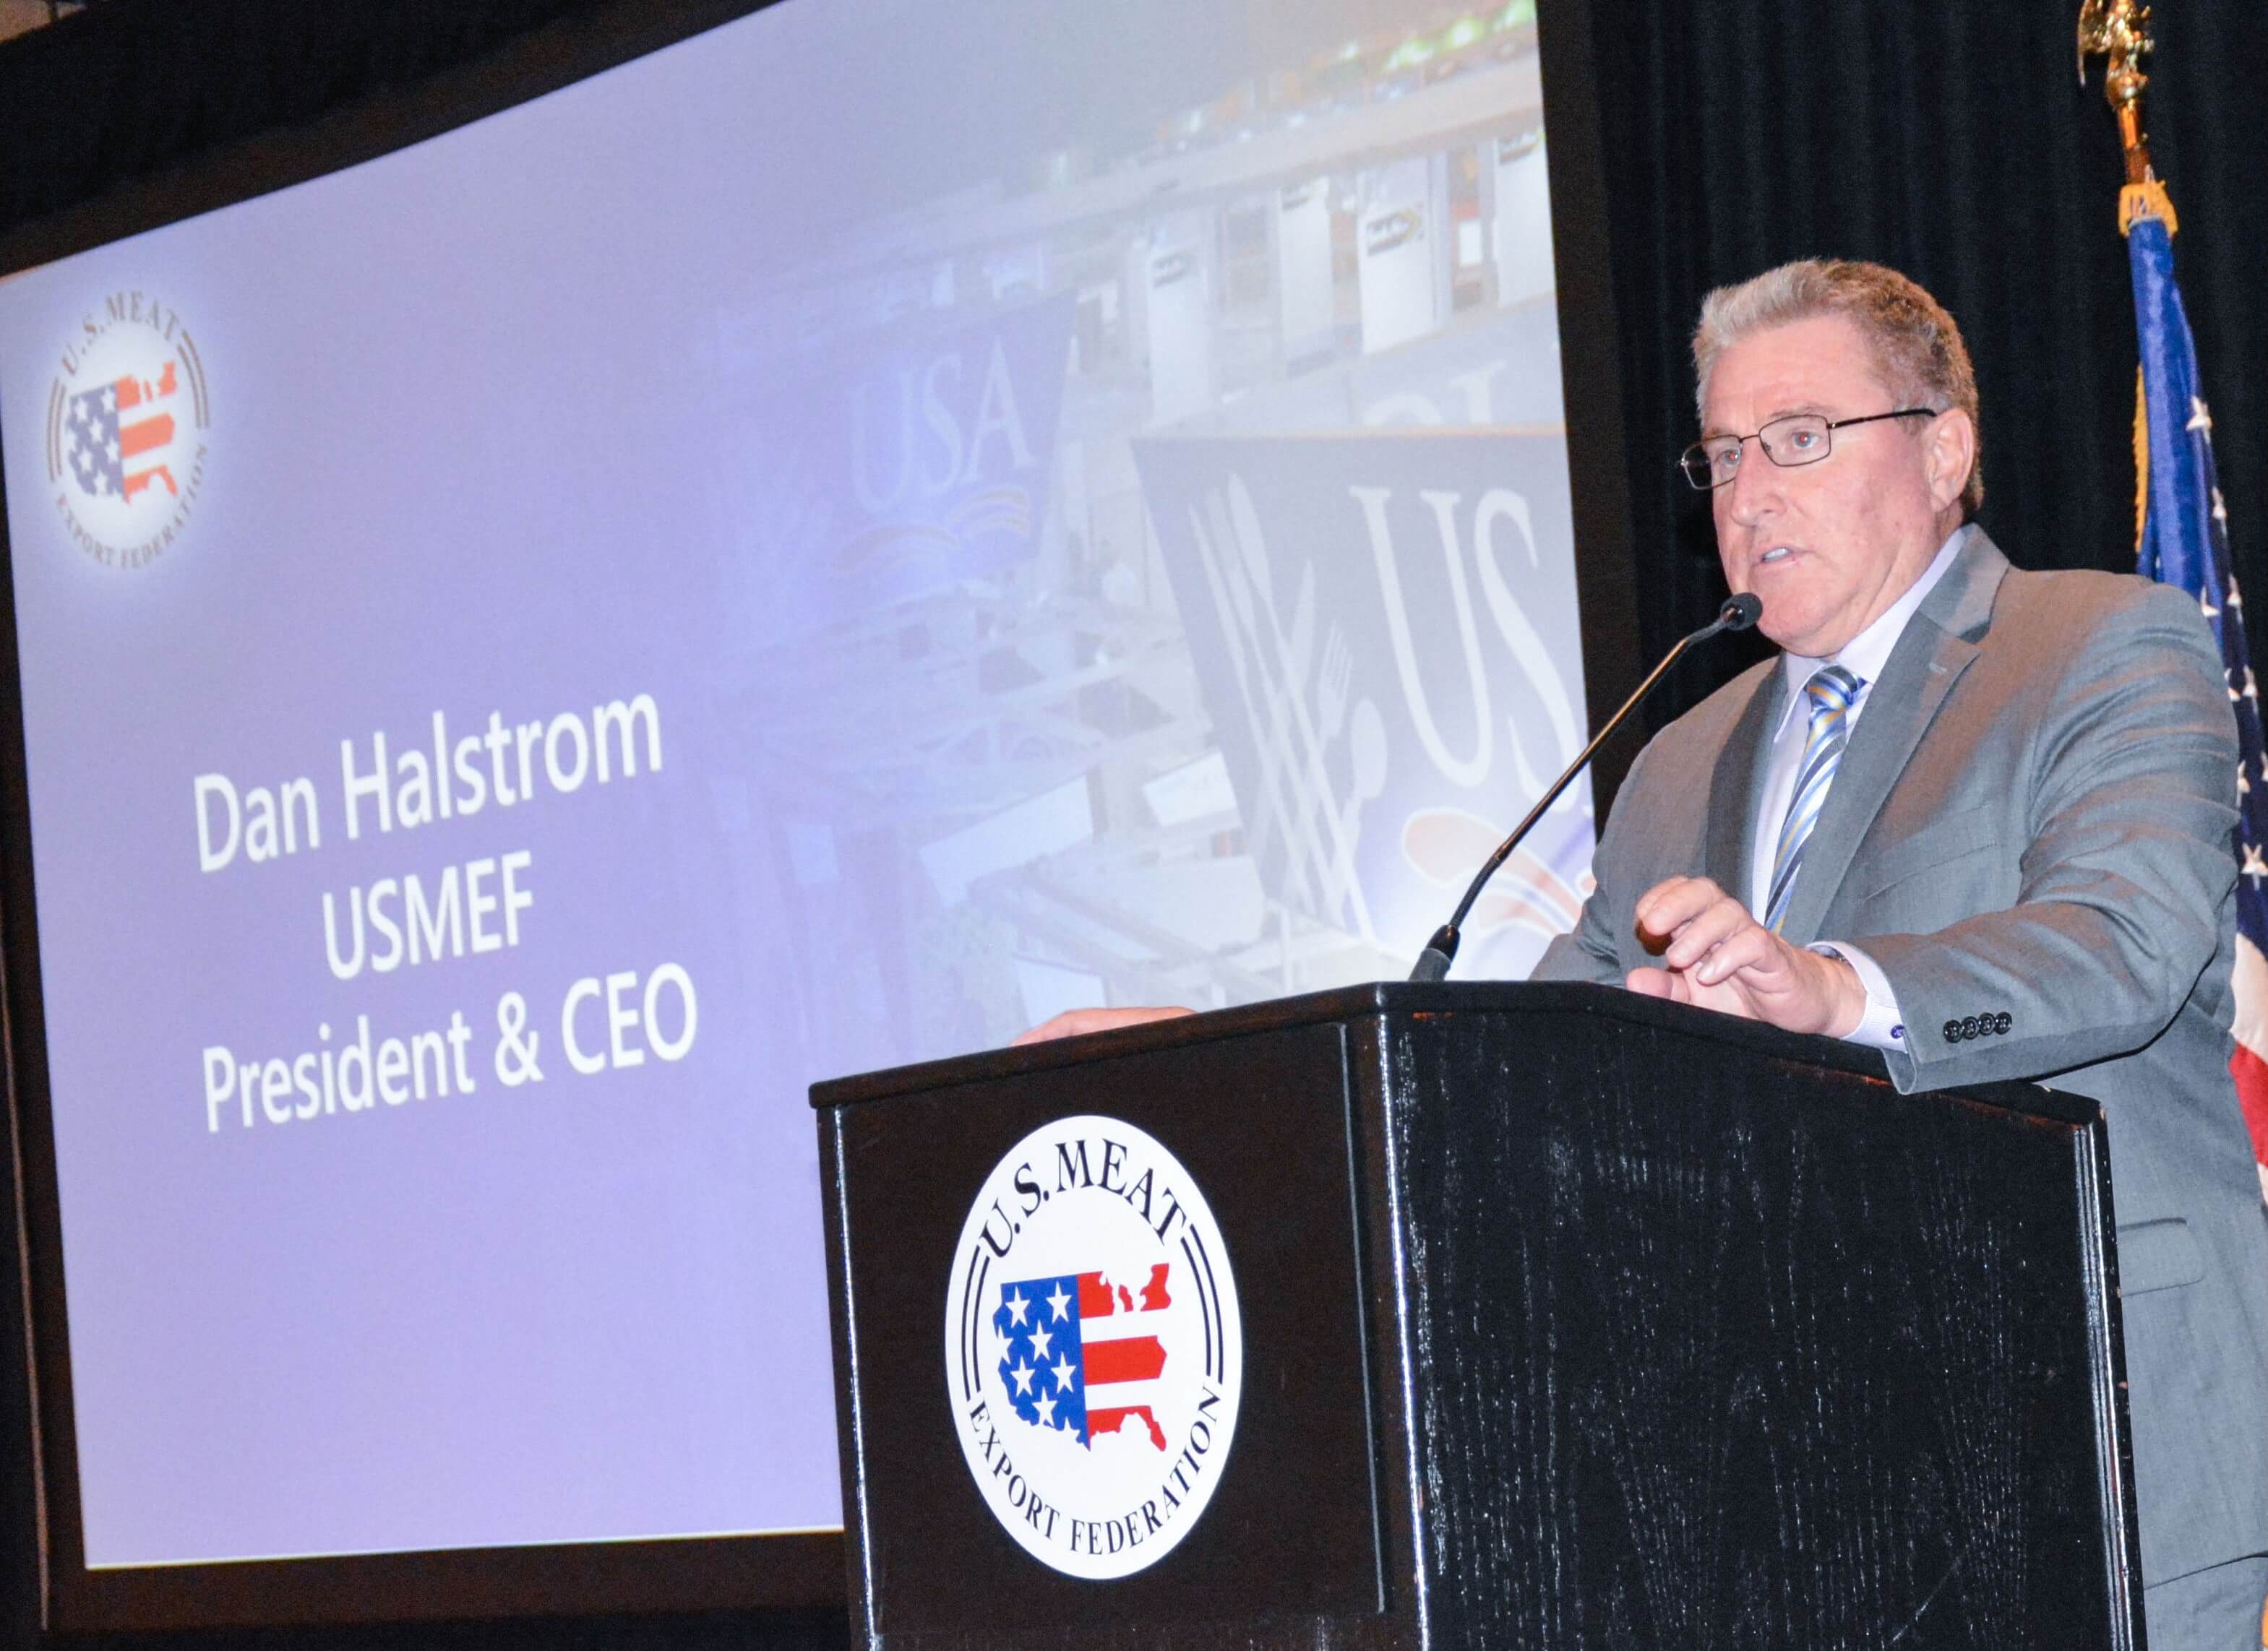 Dan Halstrom, USMEF, Expects U.S. Beef Exports To Increase in Late 2020